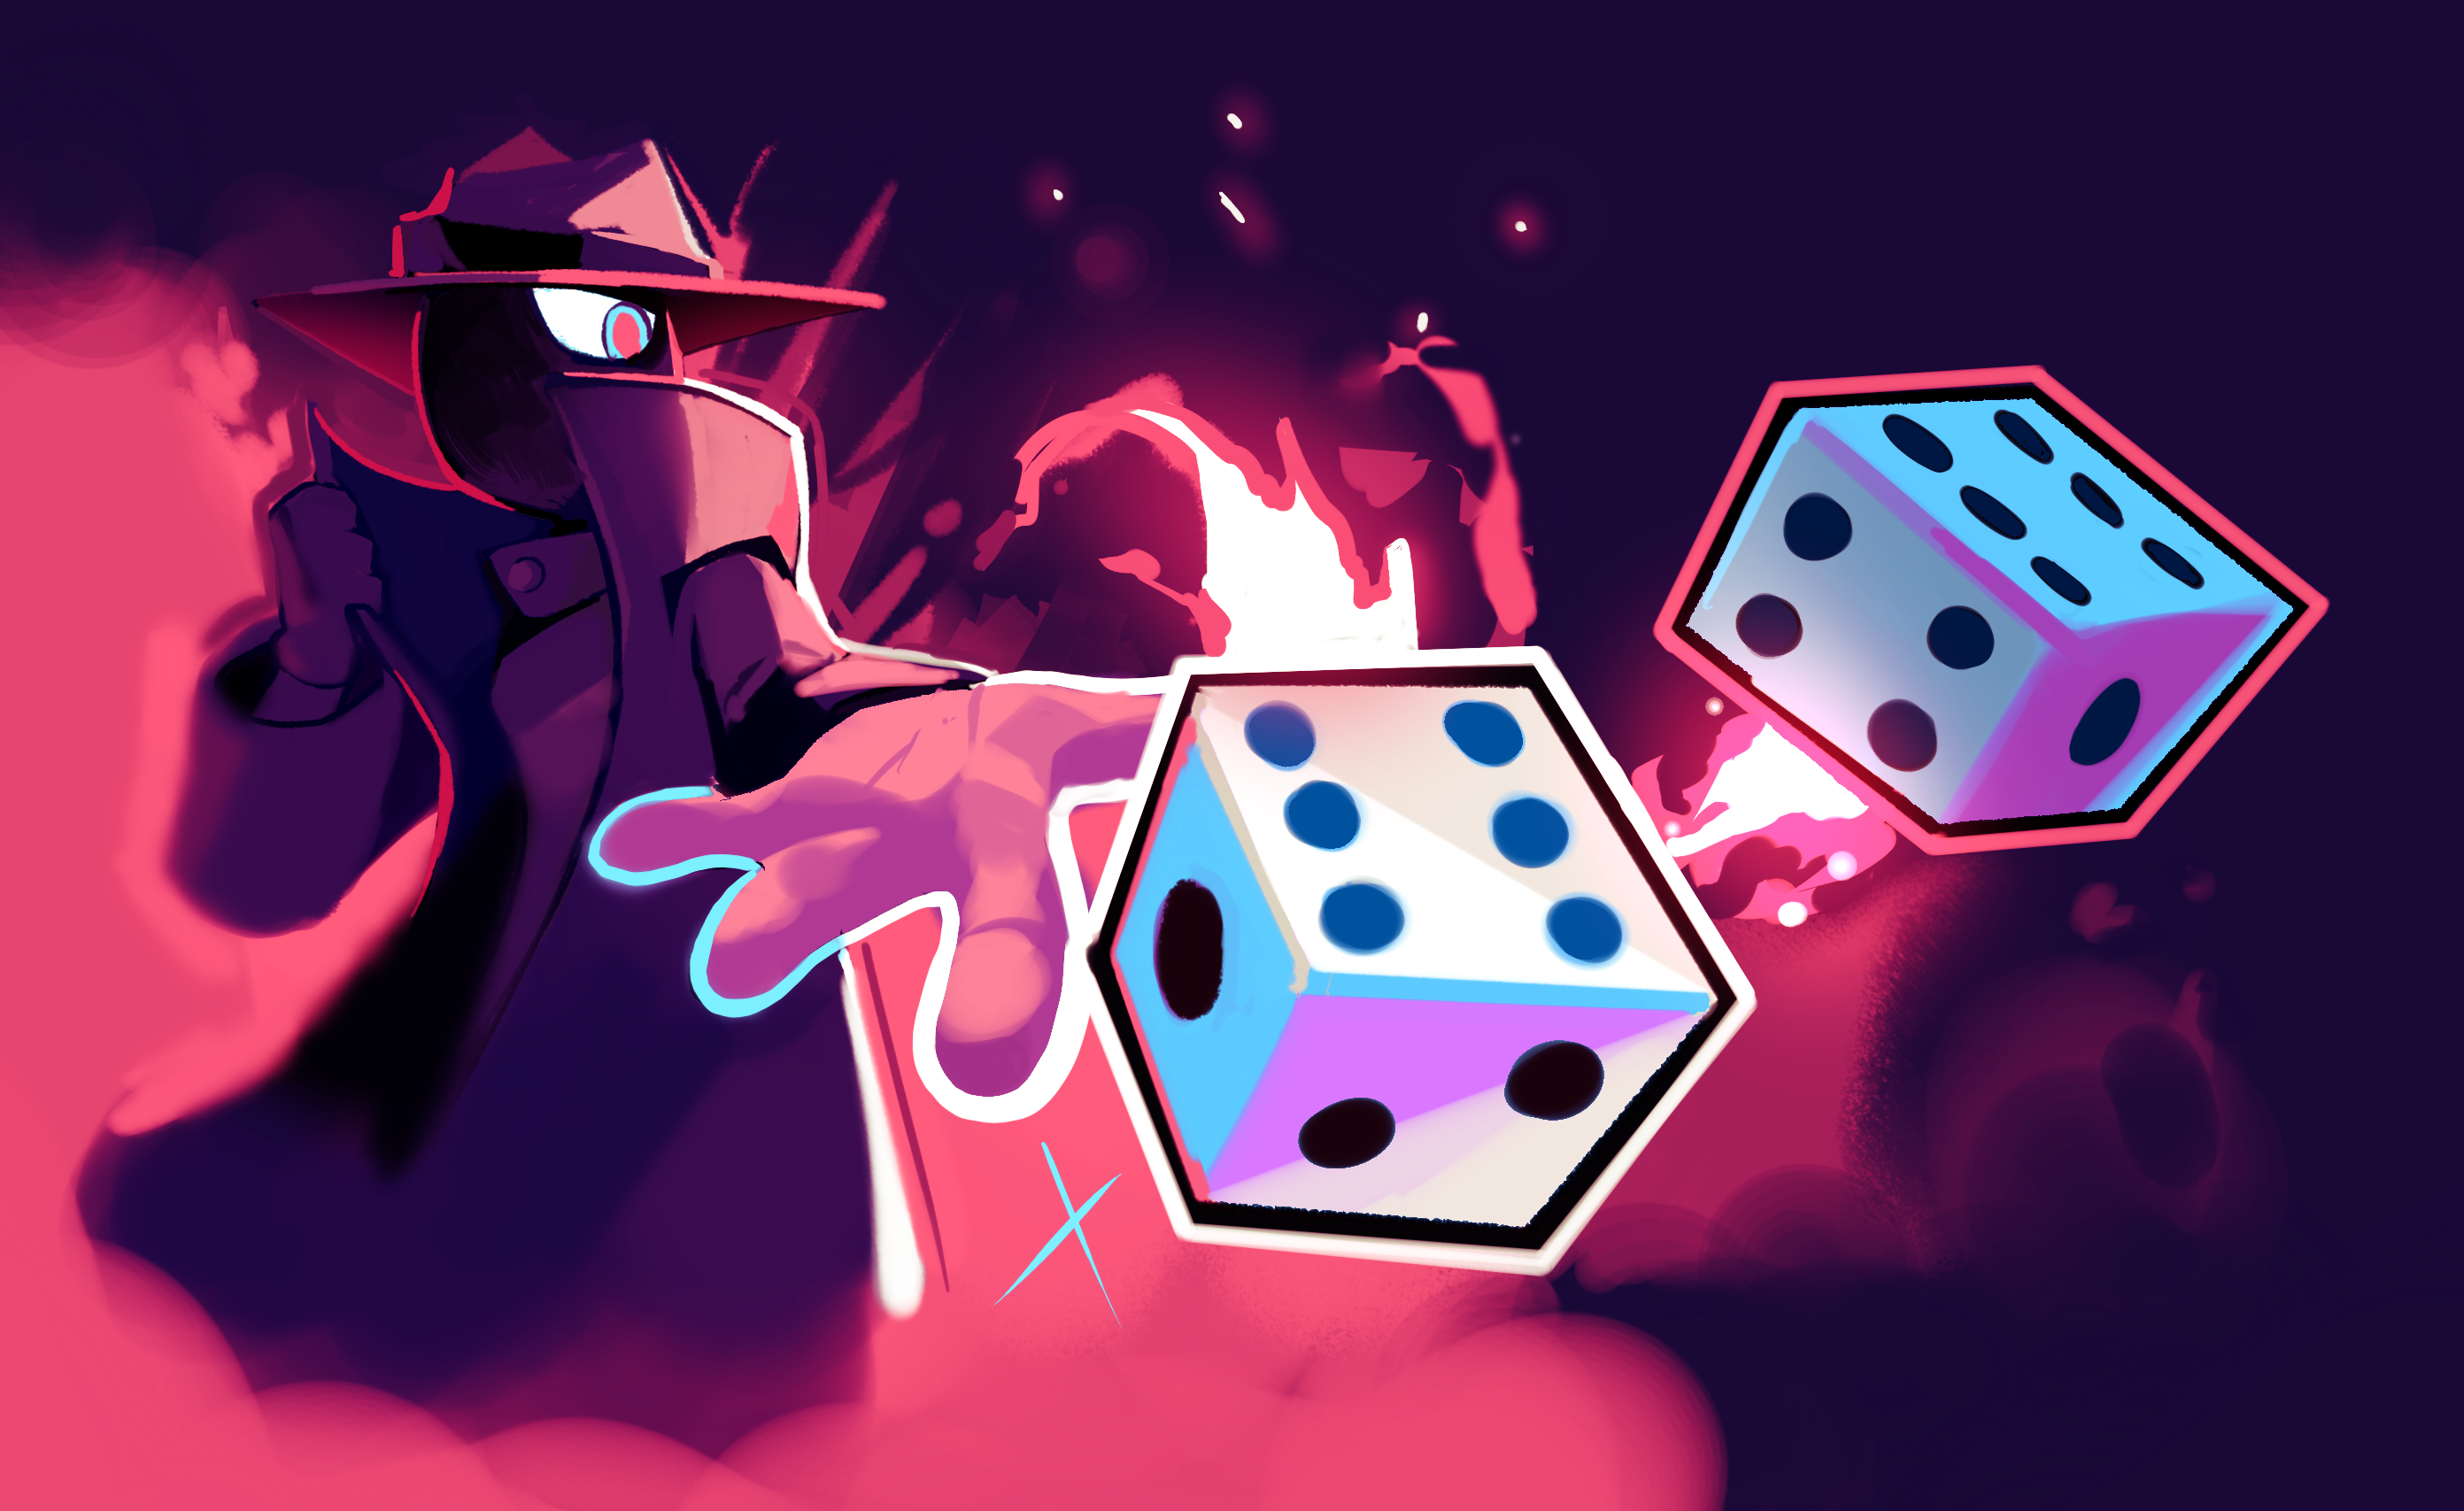 Jimmy Blitz and the Rocket Dice